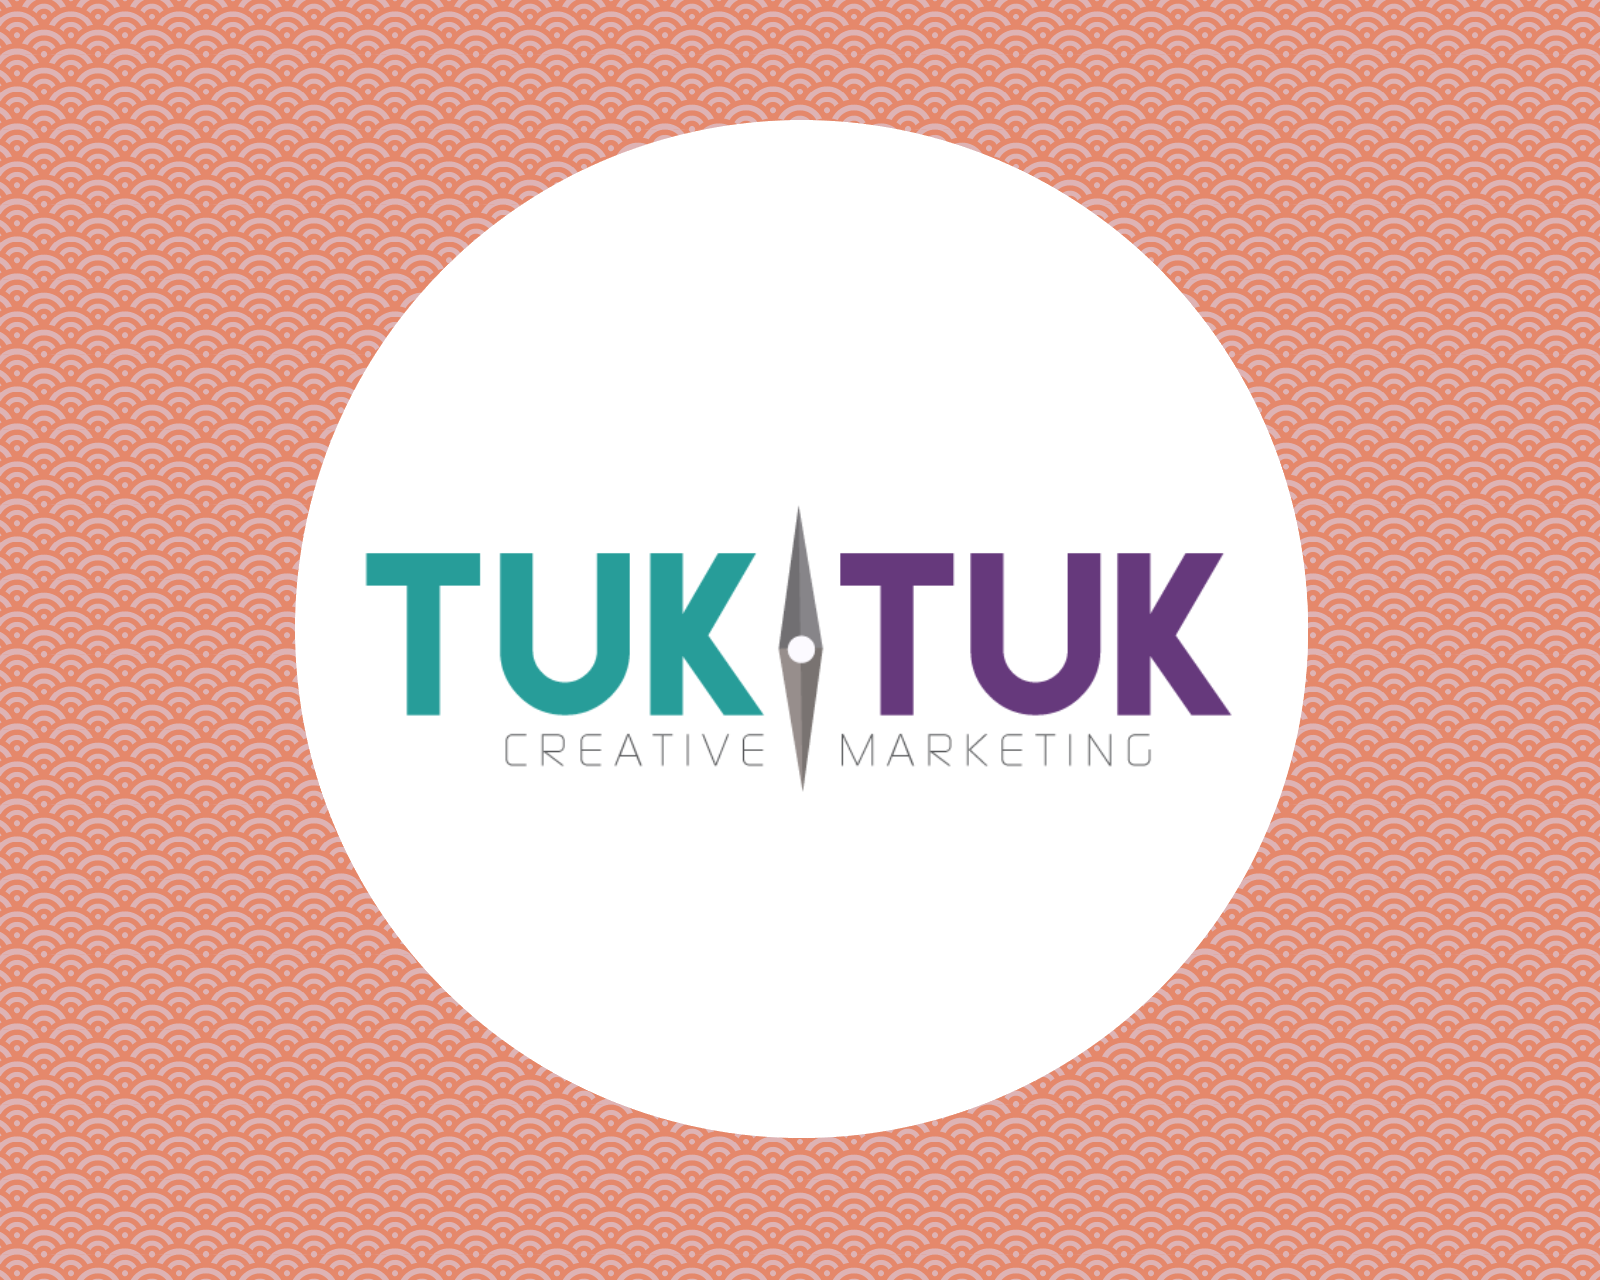 The logo for TukTuk Creative Marketing in the centre of a white circle. The circle is set against a backdrop of a dark pink and salmon coloured link-like pattern. The logo features prominently the words "TUK TUK" in a bold font in all capitals. The first "TUK" is in a turquoise font and the second in a deep purple font. They are separated by a compass needle pointing north to south. The words "CREATIVE MARKETING" sit below in light grey font.